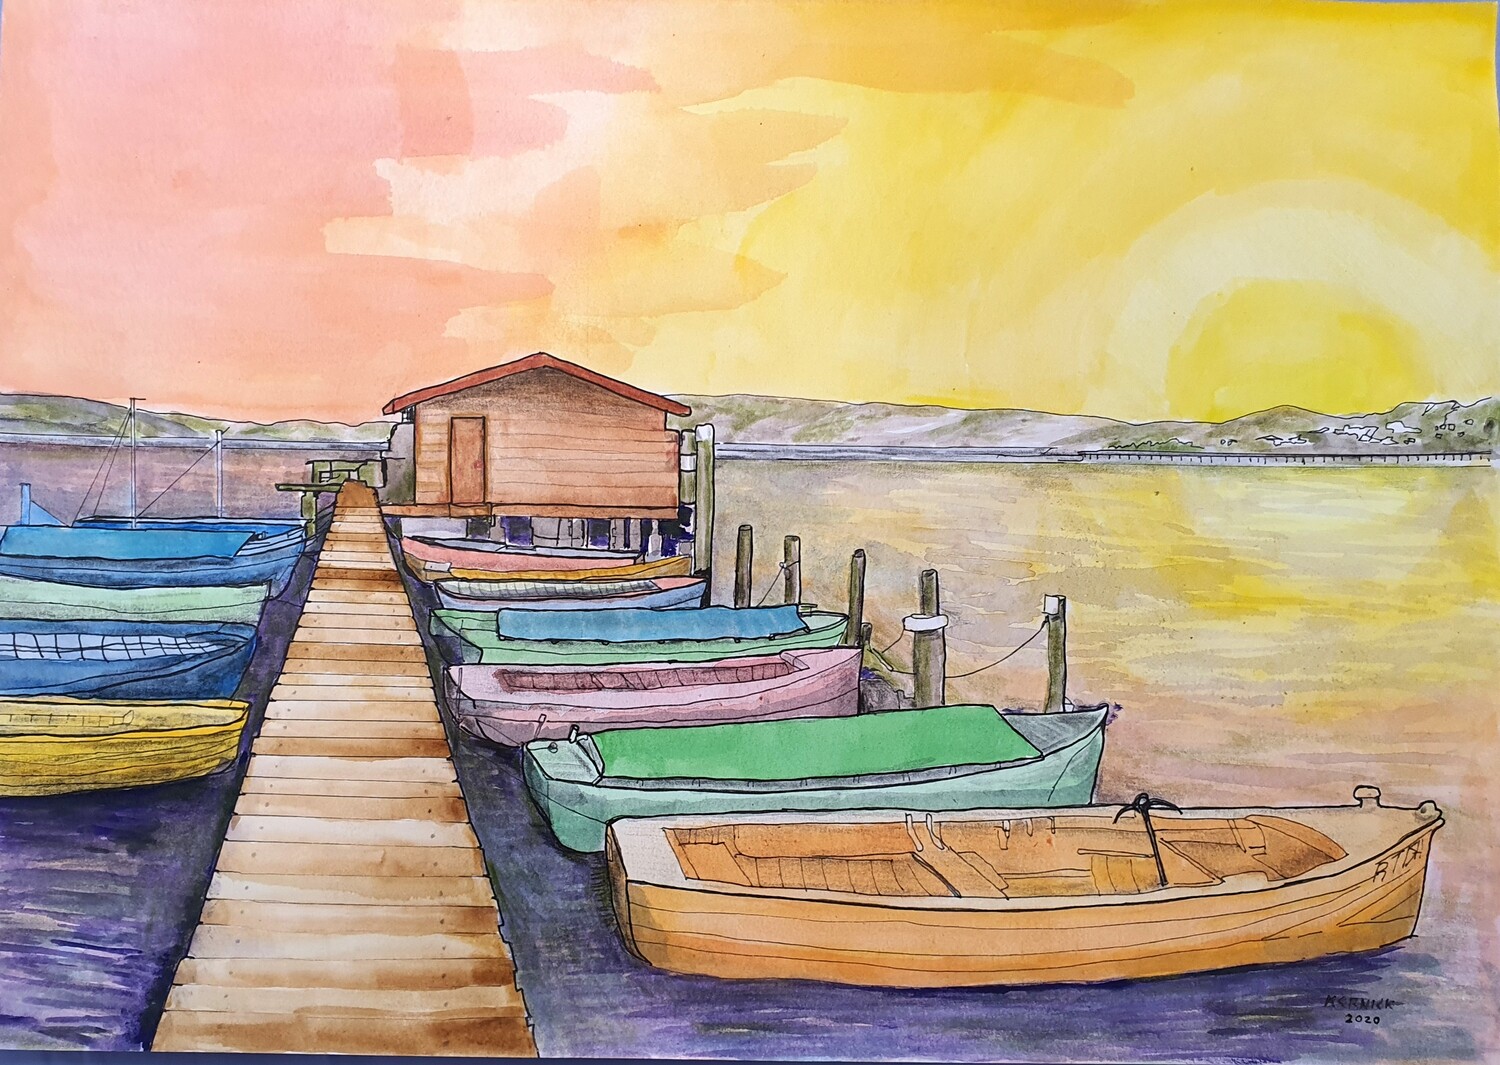 "Coloured dinghies at sunset at Shearers Wharf, Korong," -High Quality Art Print